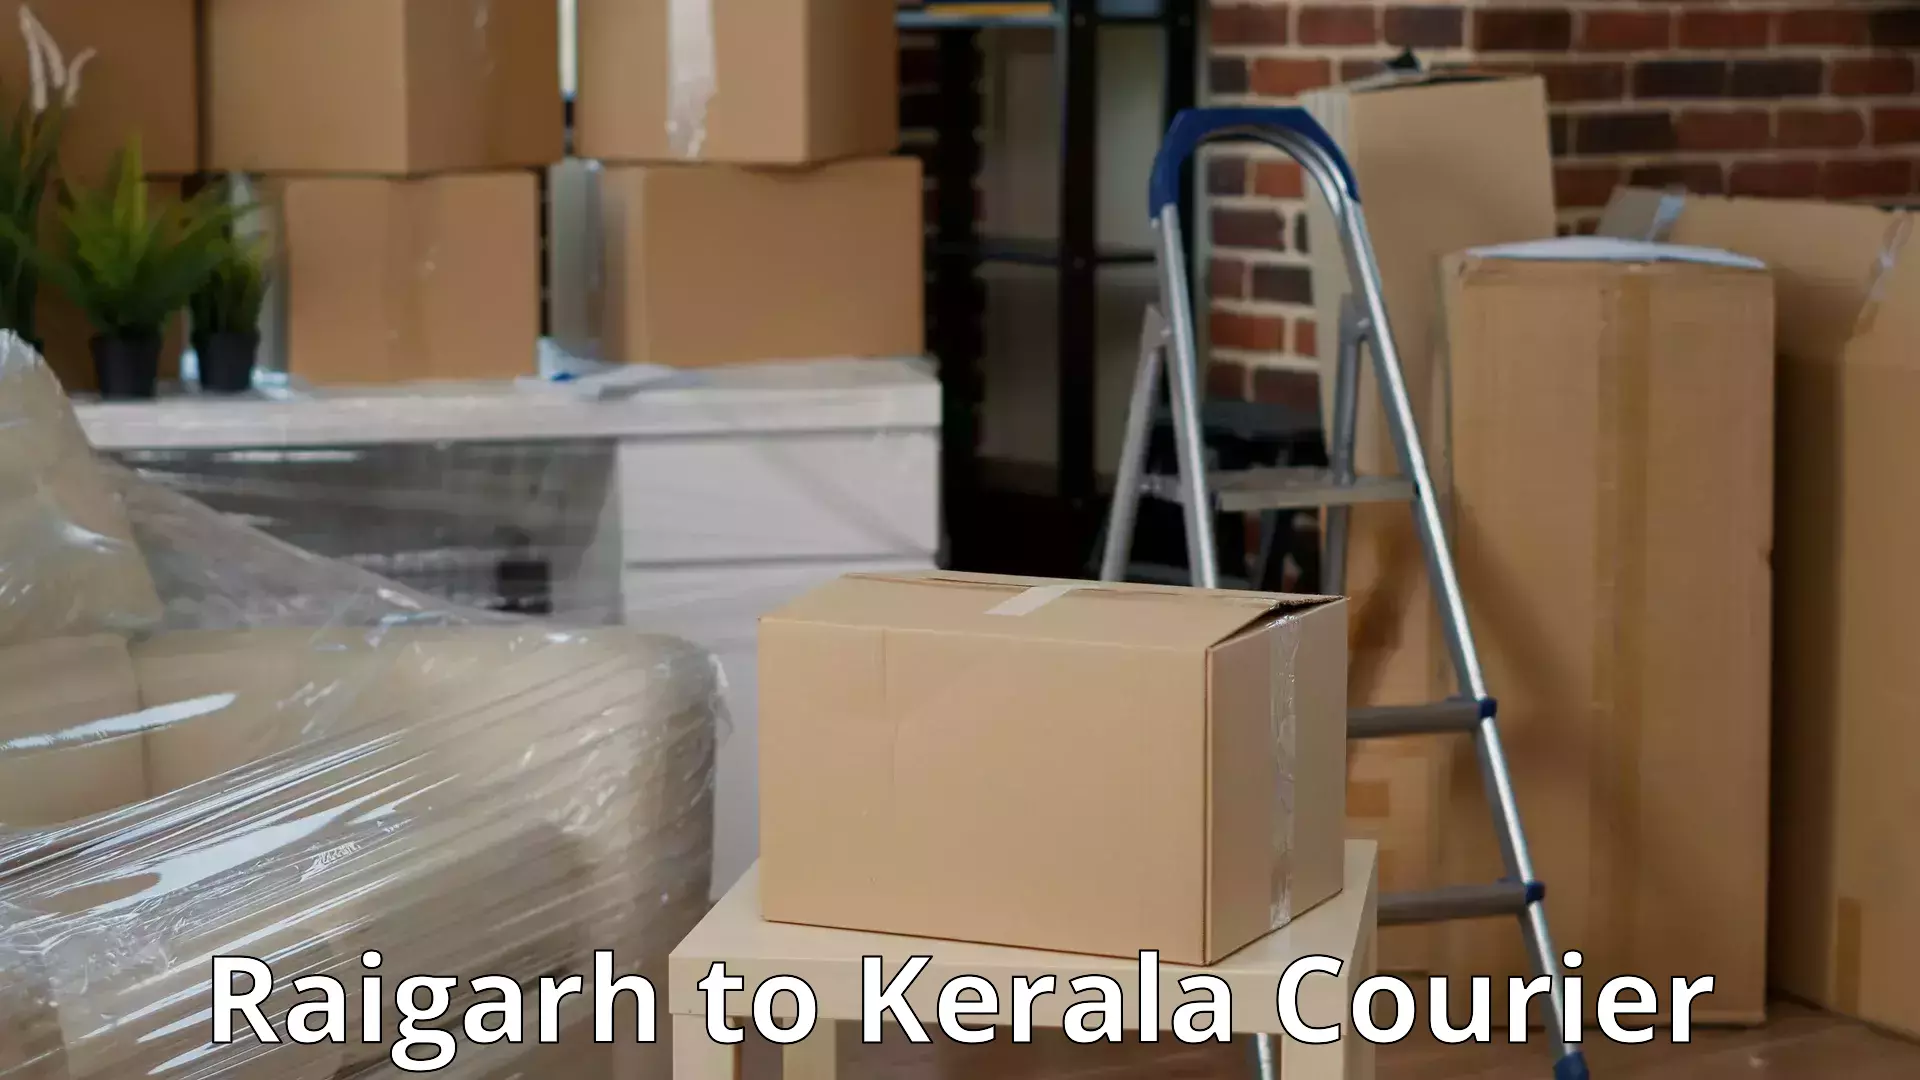 Home relocation experts Raigarh to Alappuzha